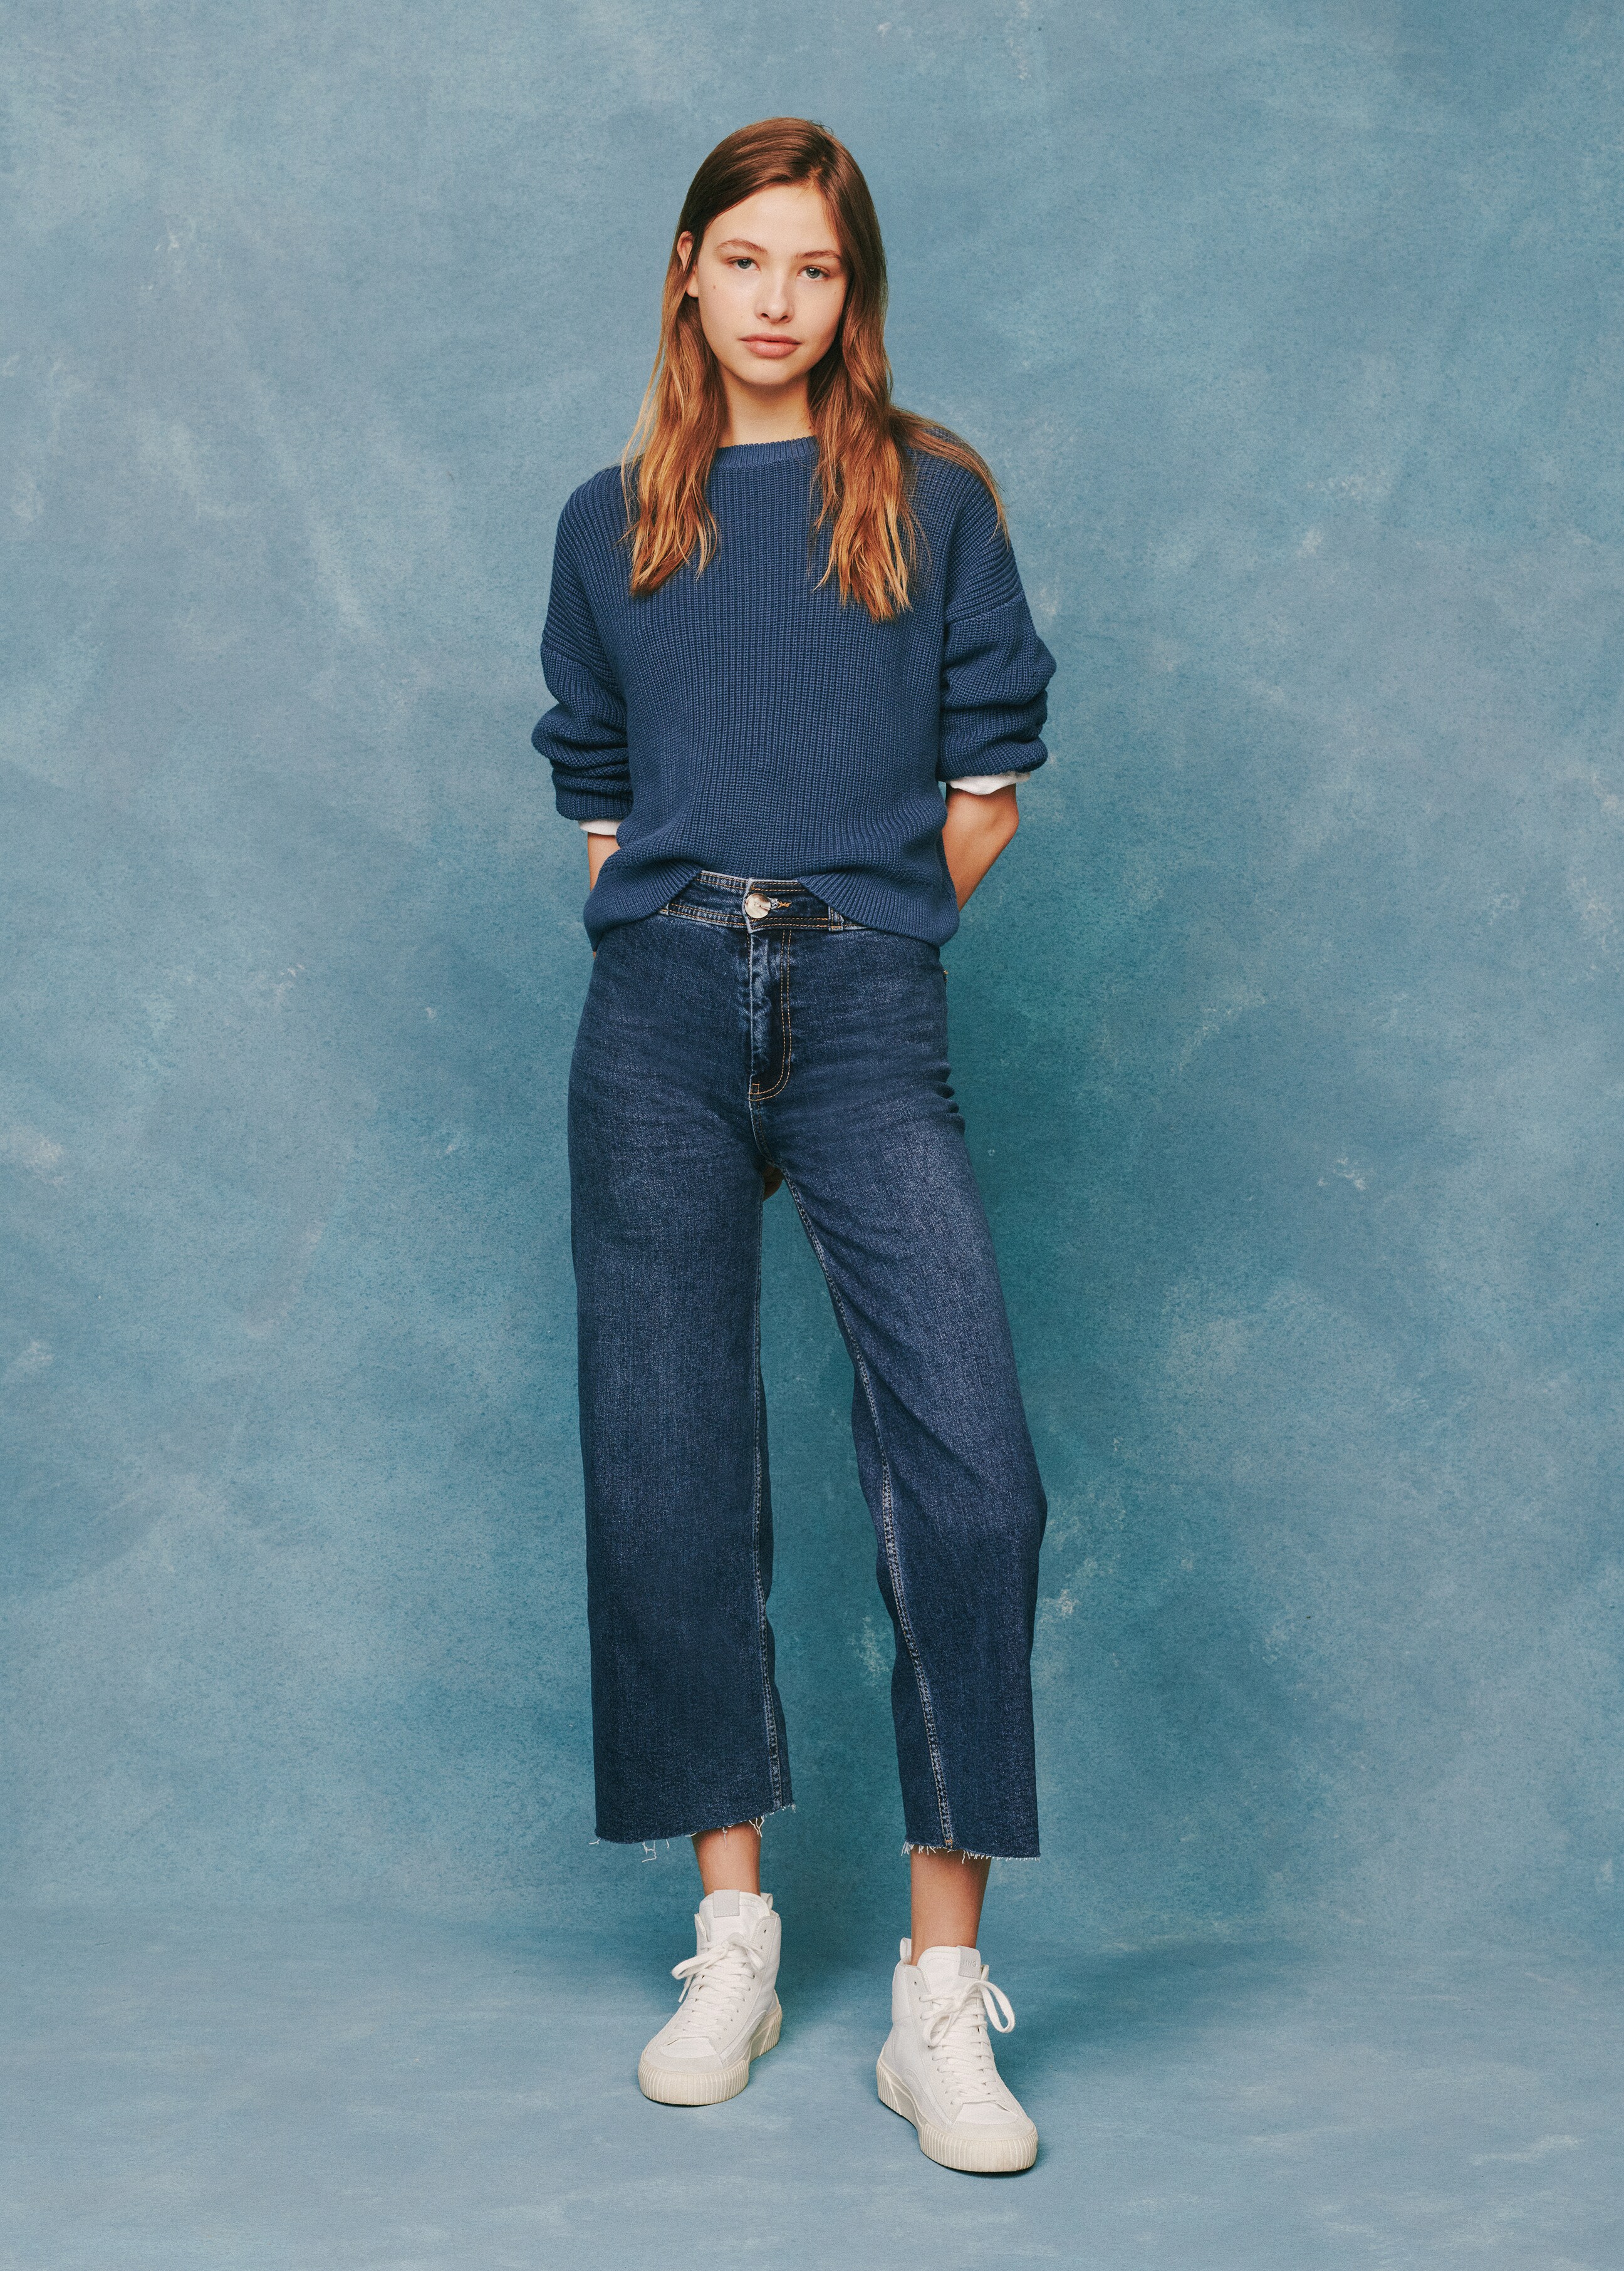 Culotte frayed jeans - Details of the article 5